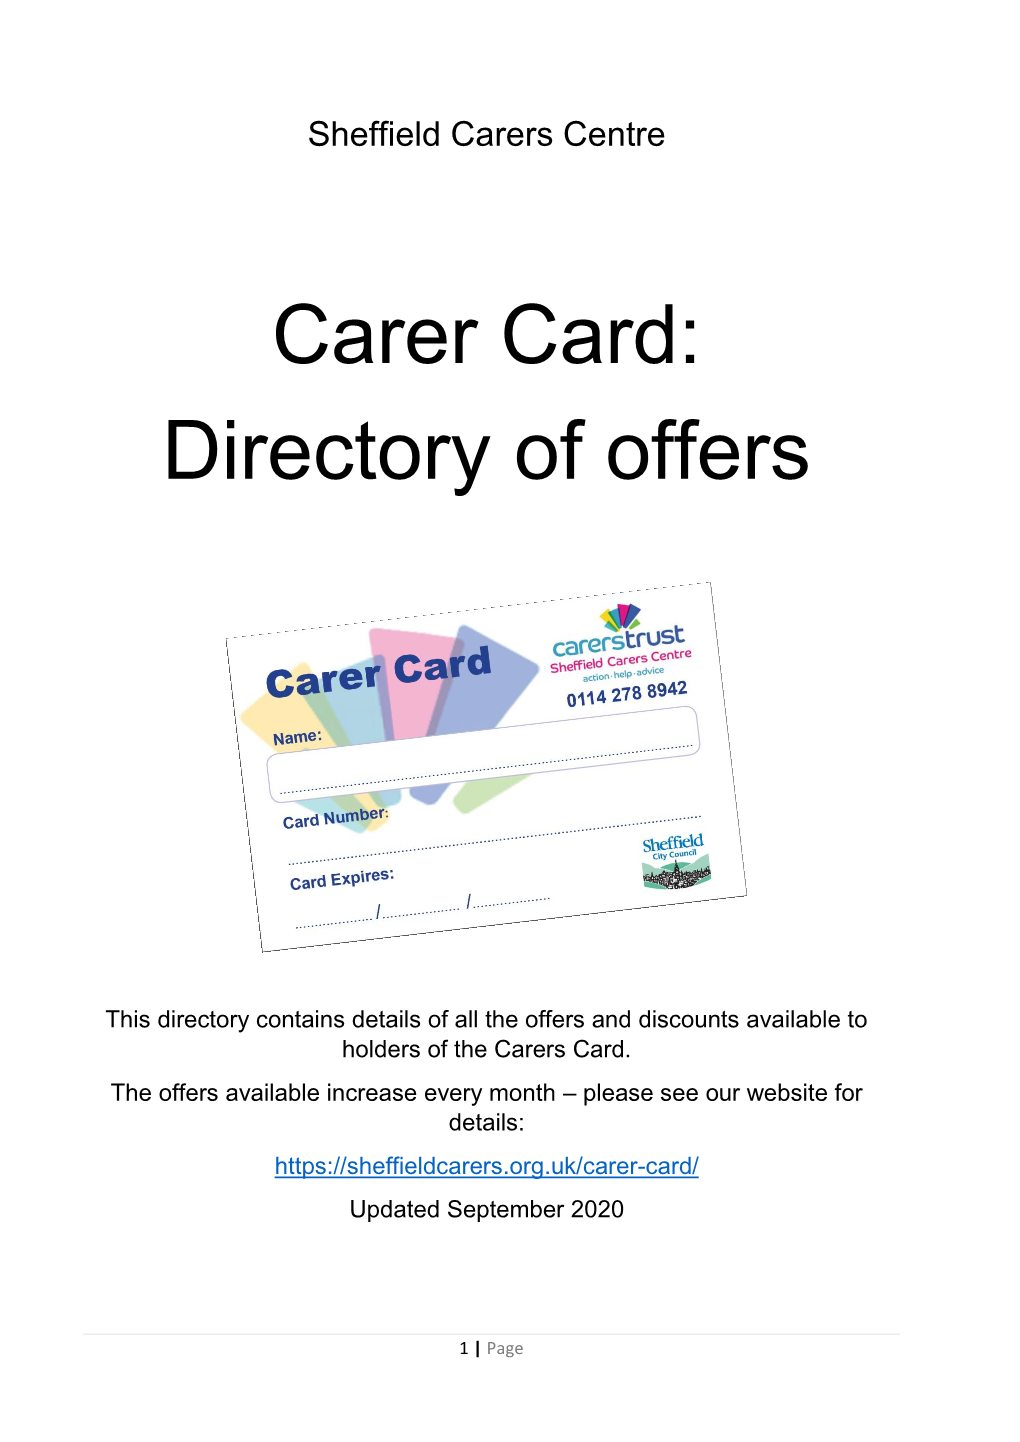 Carer Card: Directory of Offers